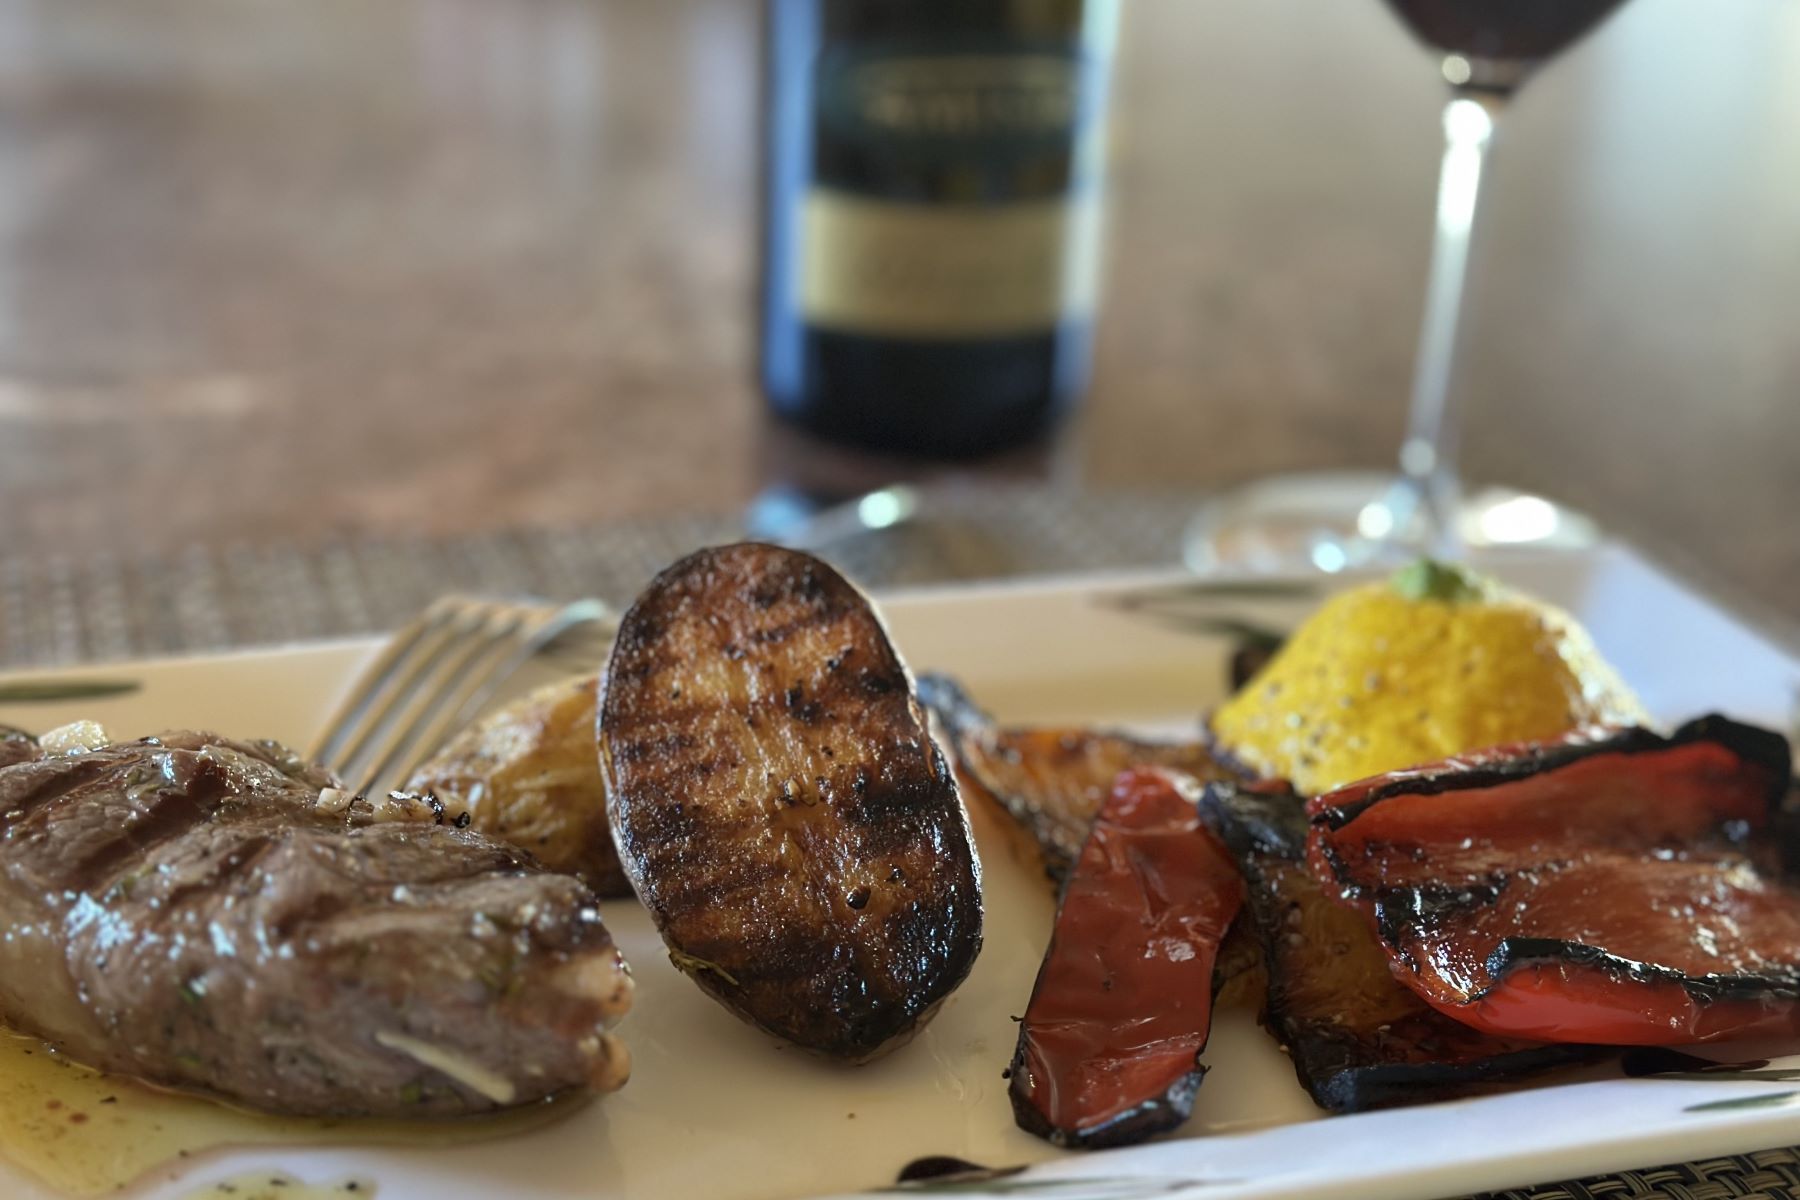 Grilled Steak, Potato and Vegatables with Amista Wine